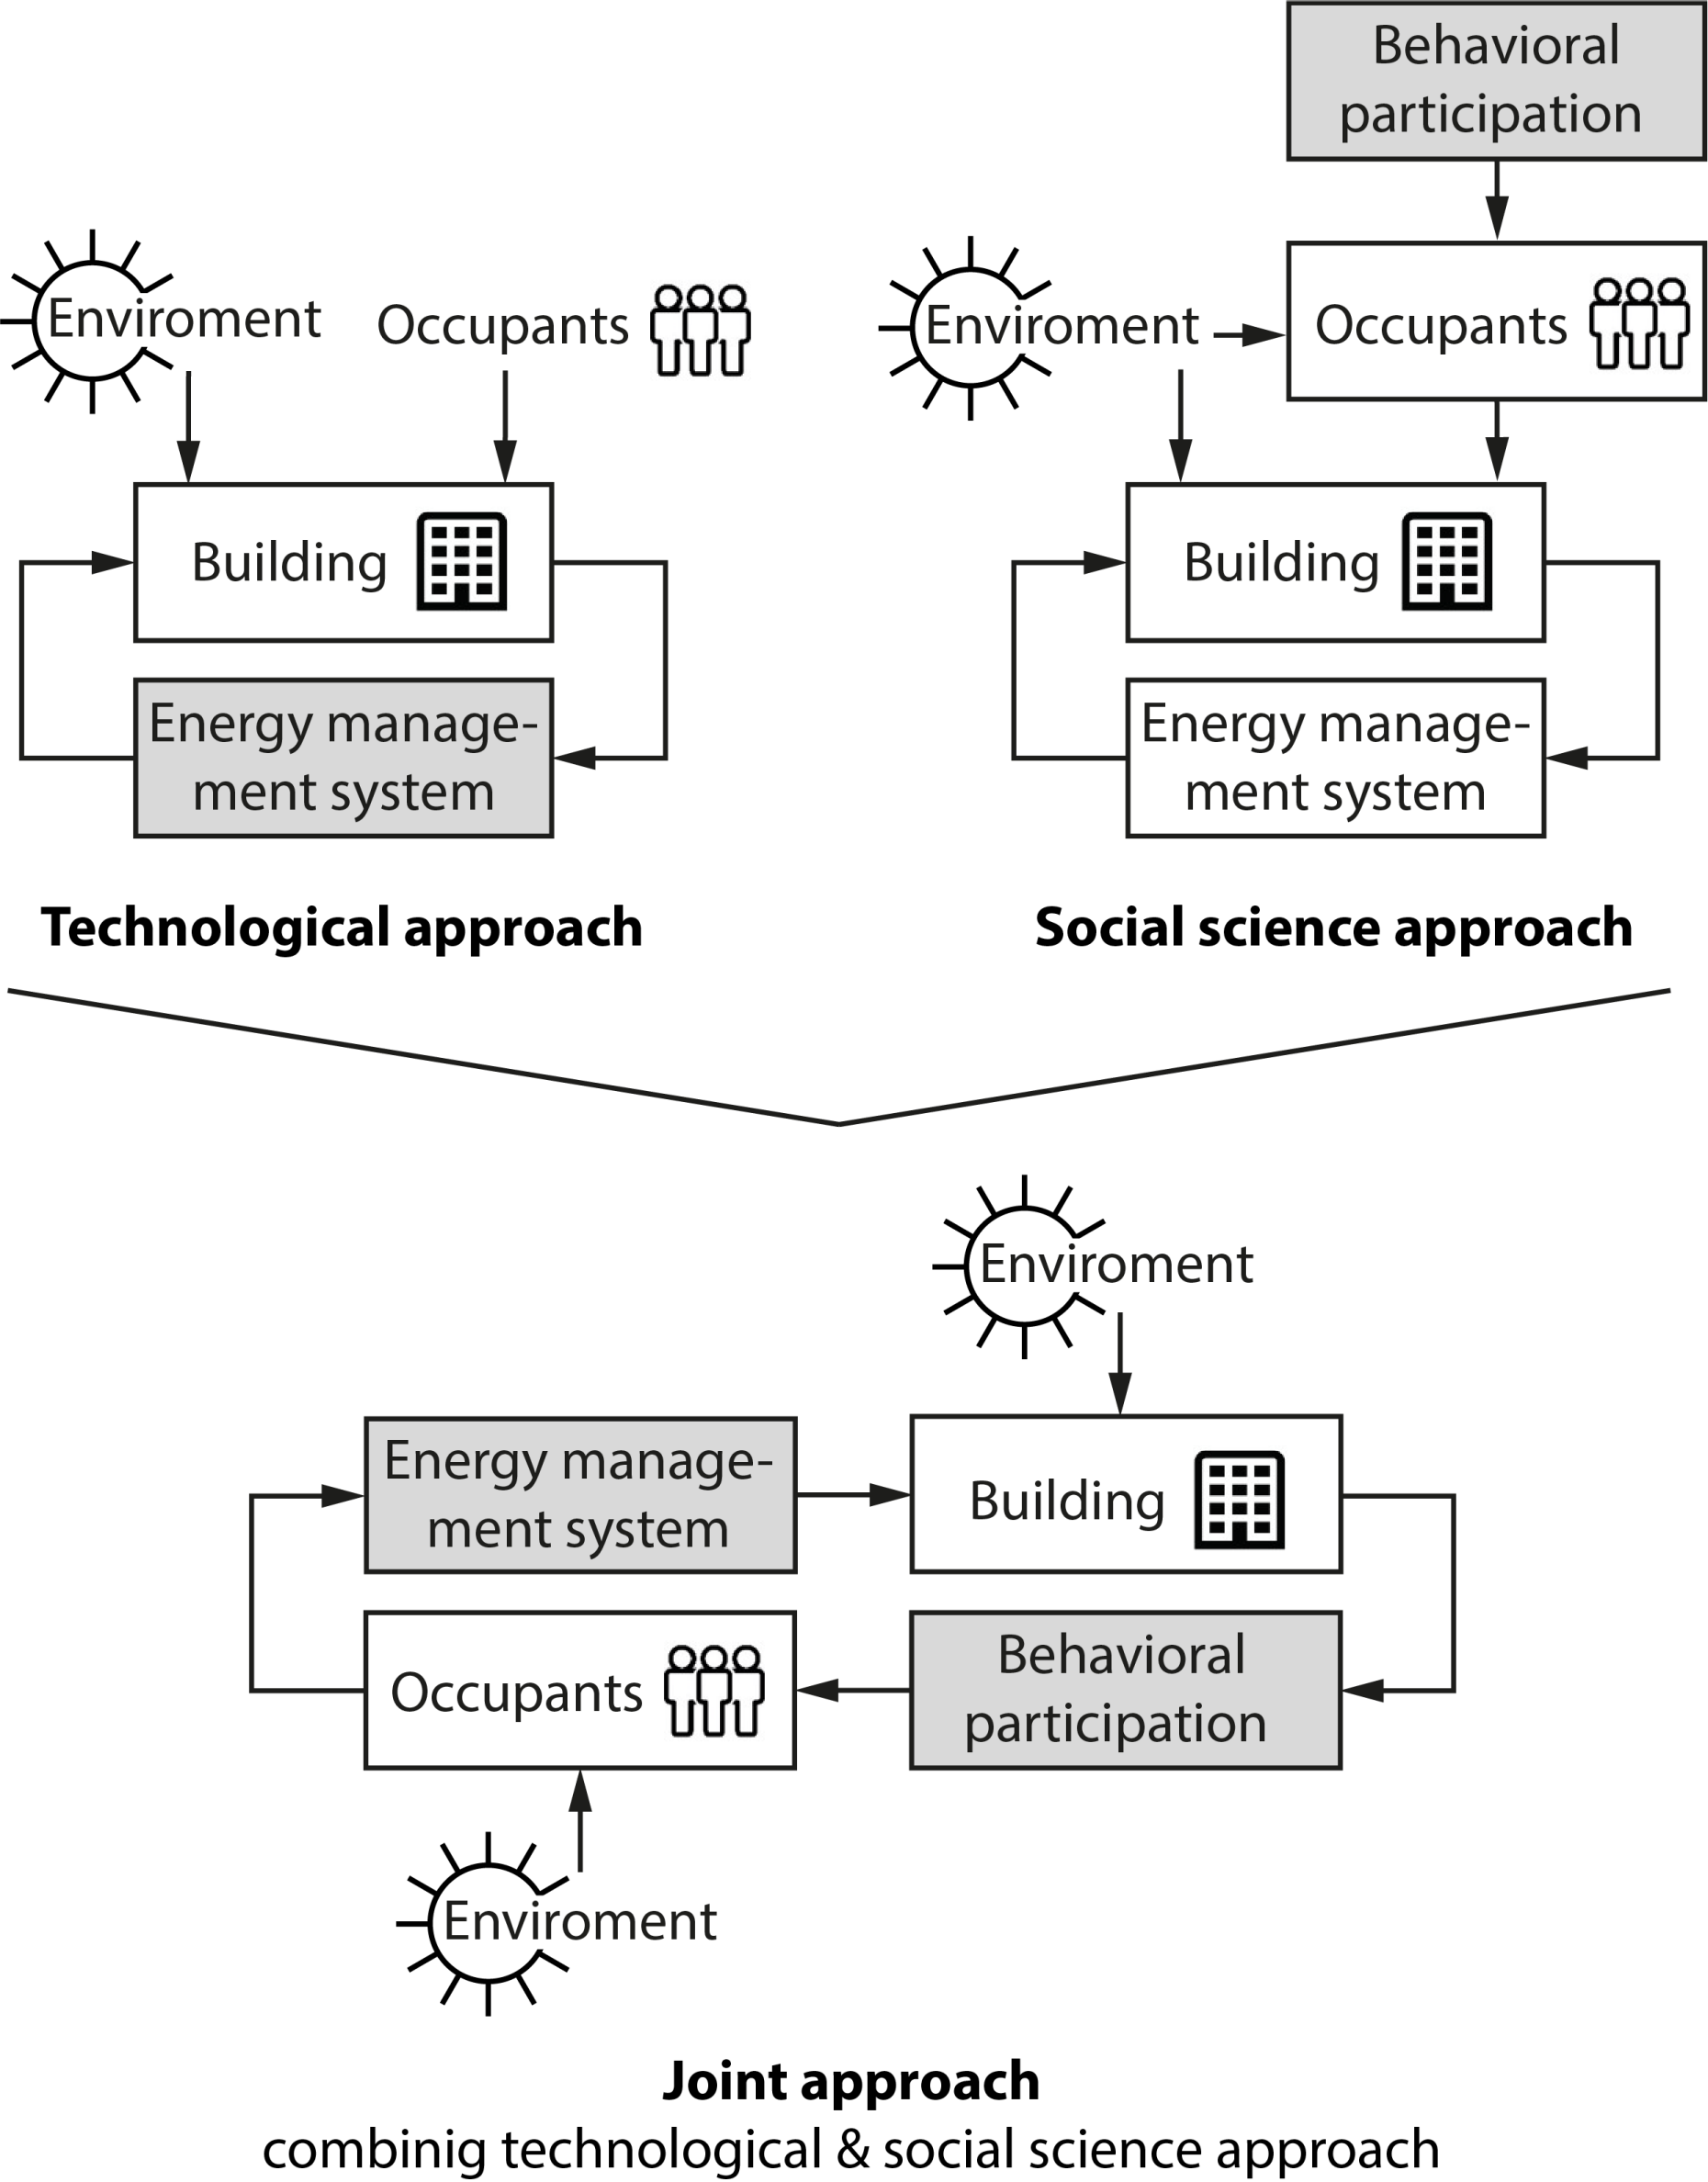 Enlarged view: Figure: Joint approach, combining technological and social science approach